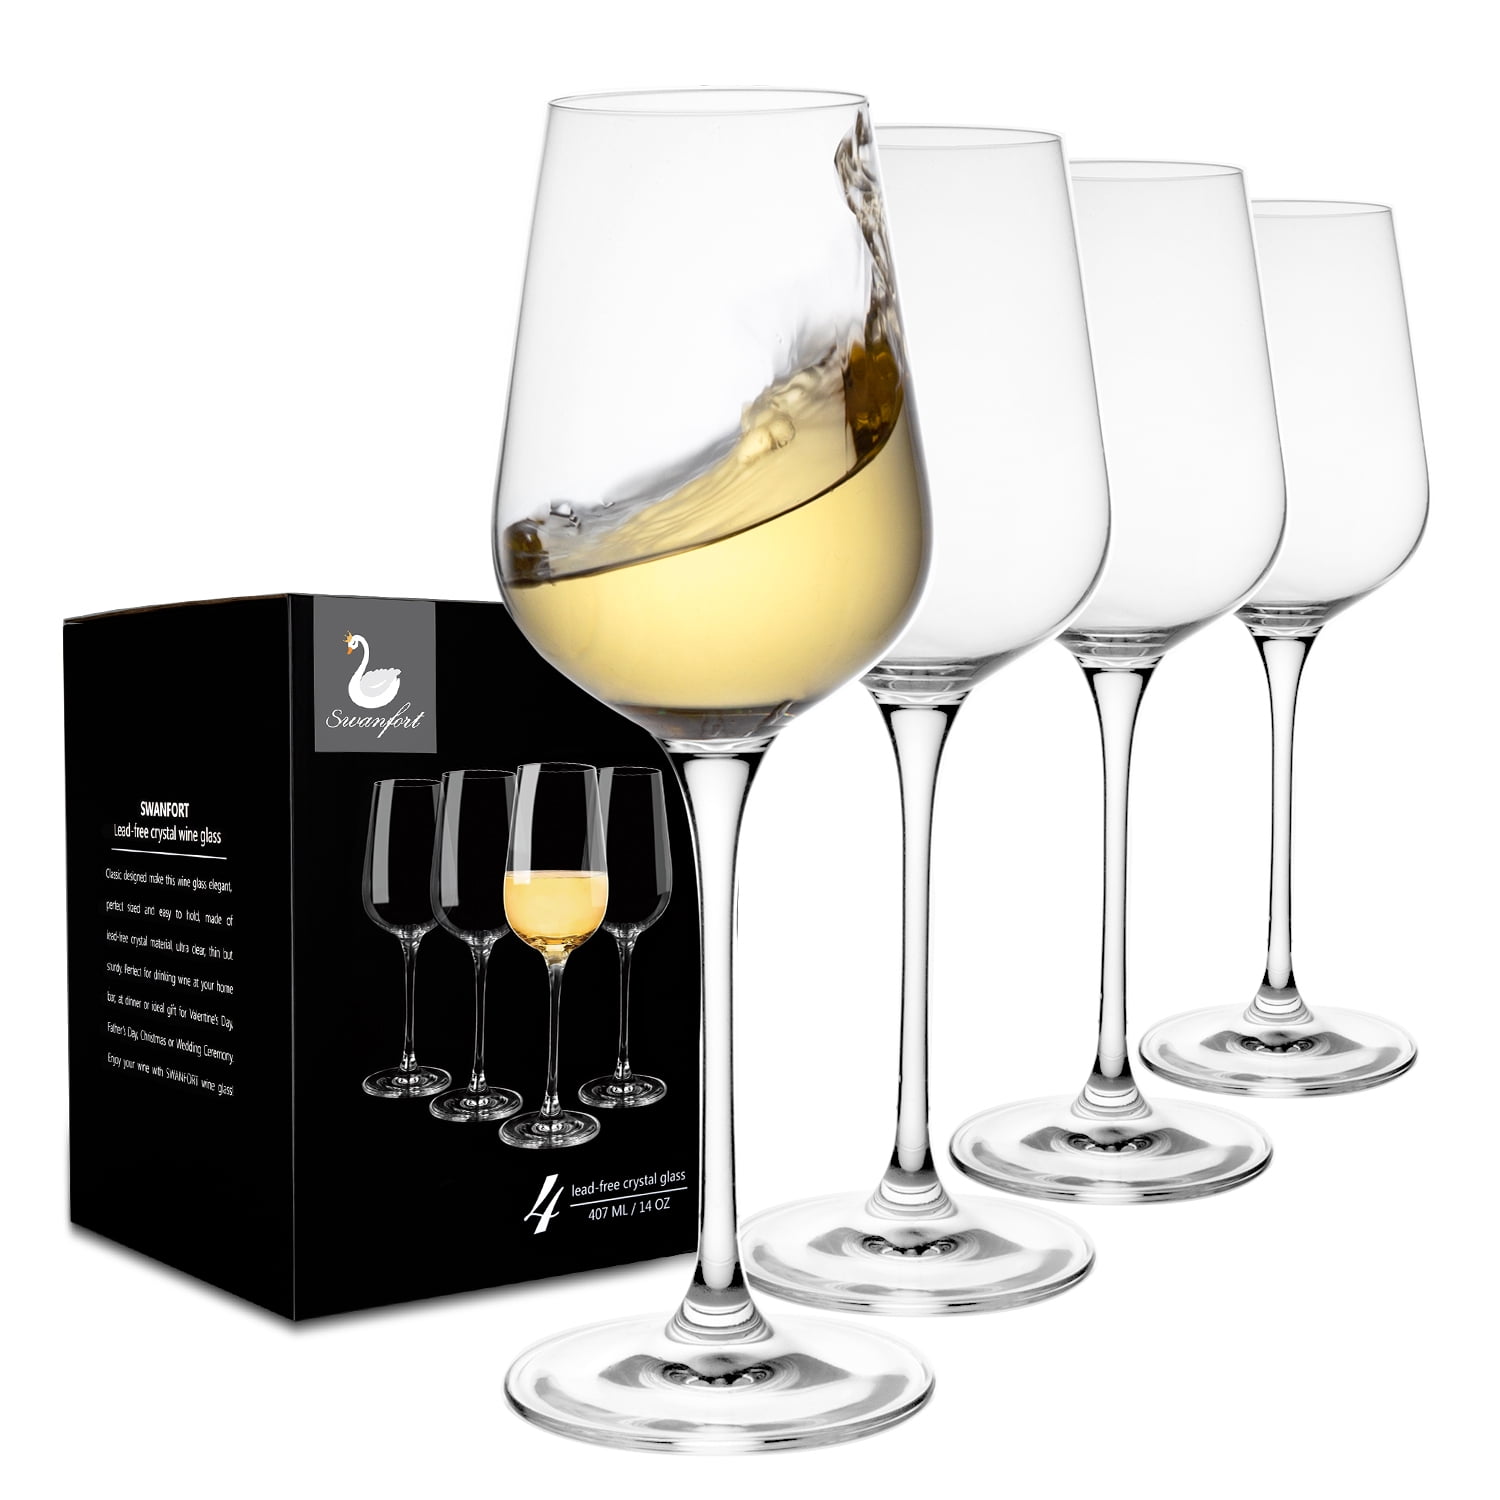 4 Hand Blown Italian Style Crystal Red or White Wine Glasses Set of 4 Safer Packaging for Any Occasion Lead-Free Premium Crystal Clear Glass 